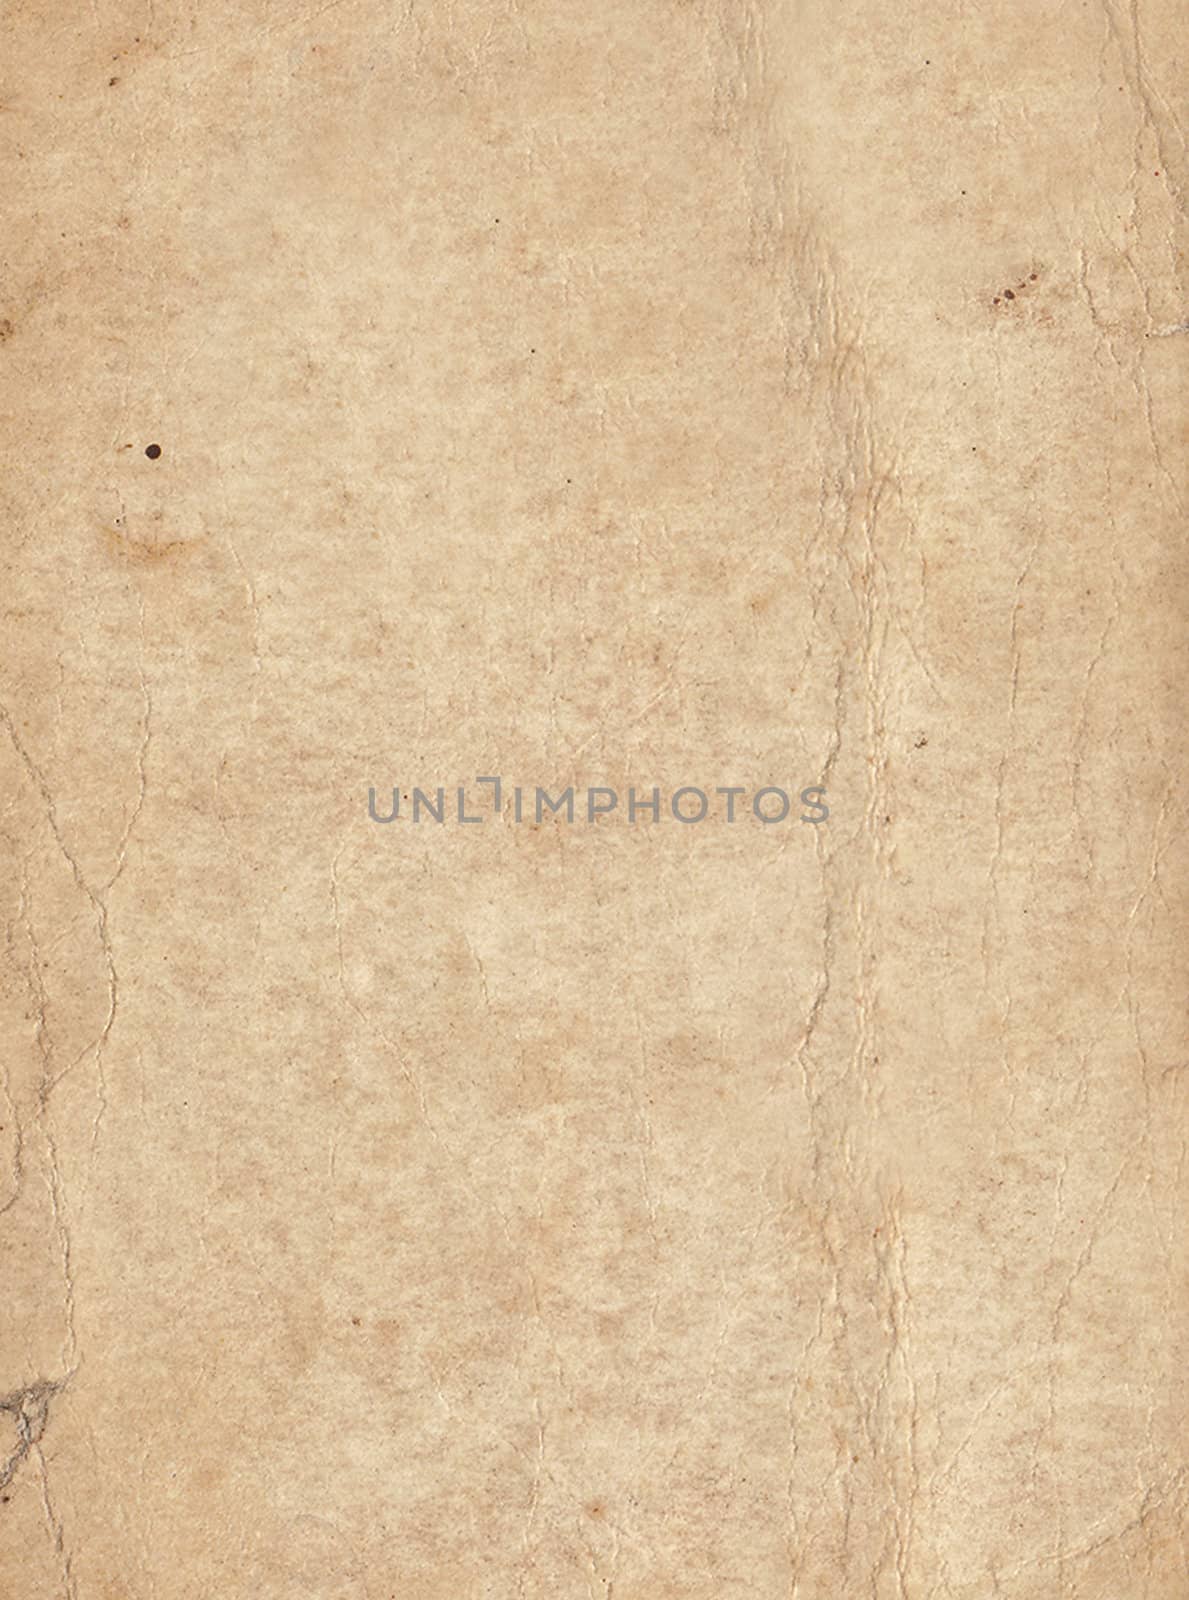 Old brown paper isolated on a white background.